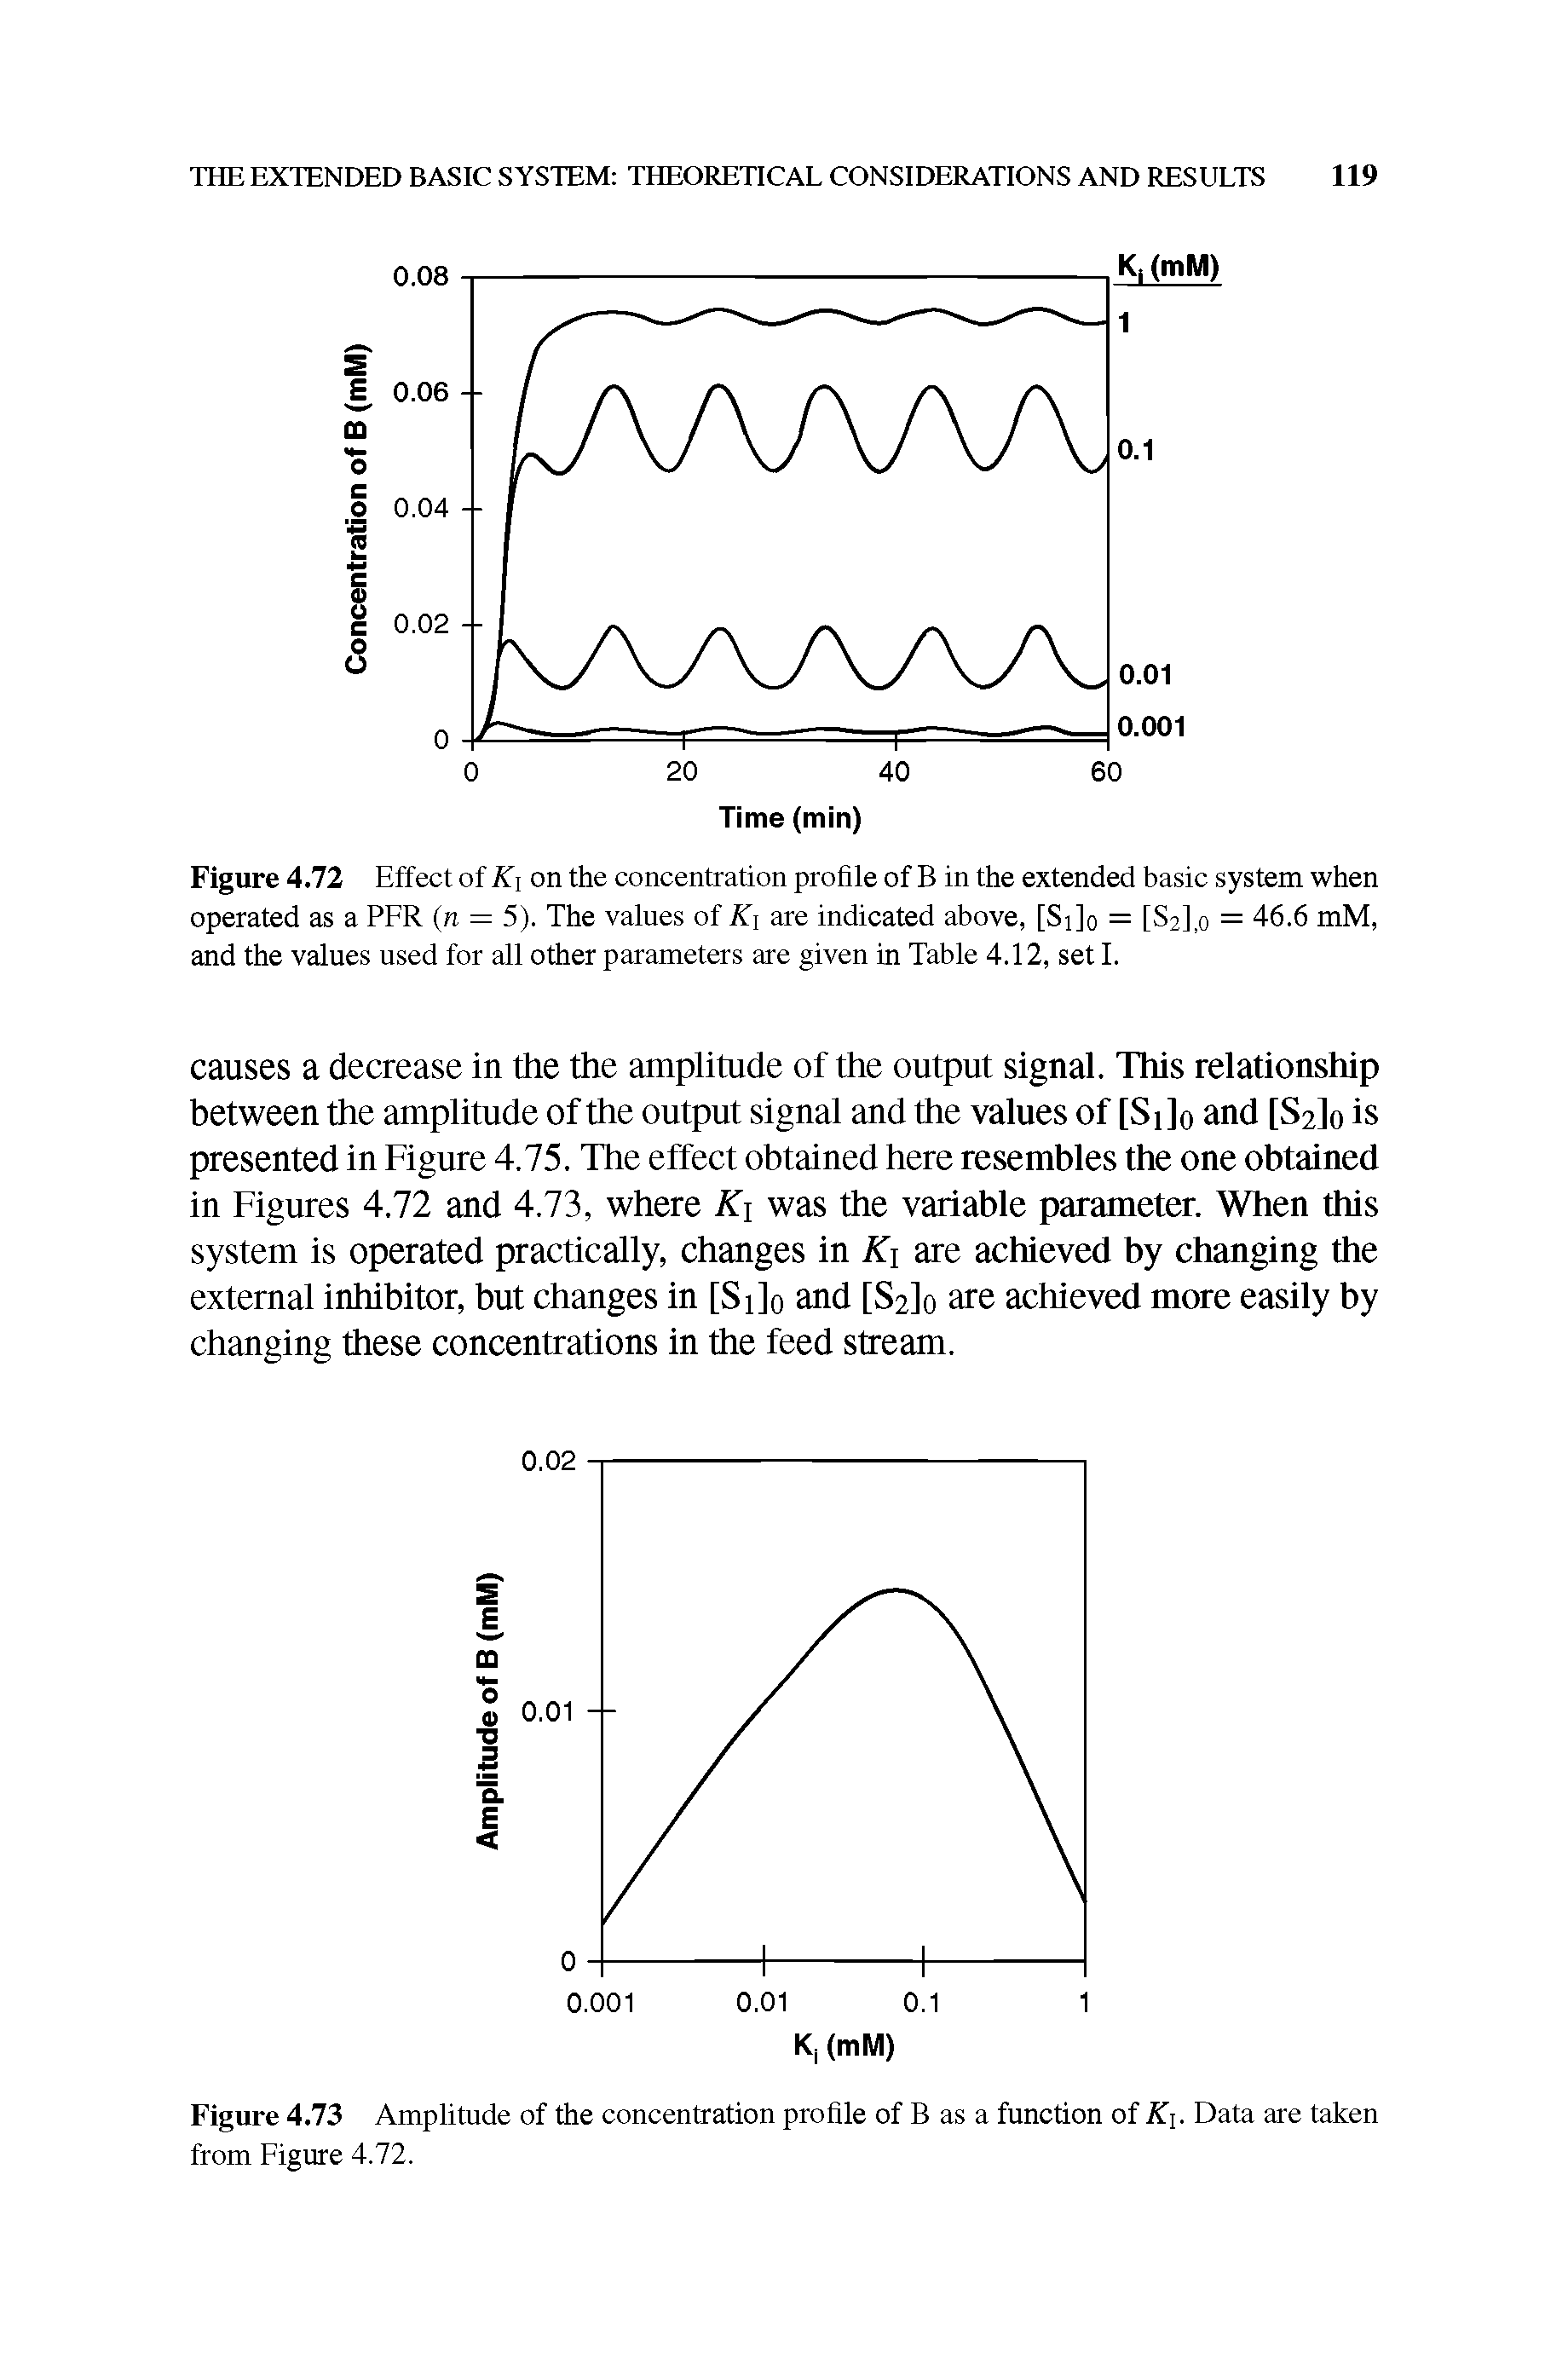 Figure 4.72 Effect of K on the concentration profile of B in the extended basic system when operated as a PER (n = 5). The values of Ki are indicated above, [Si]o = [S2],o = 46.6 mM, and the values used for all other parameters are given in Table 4.12, set I.